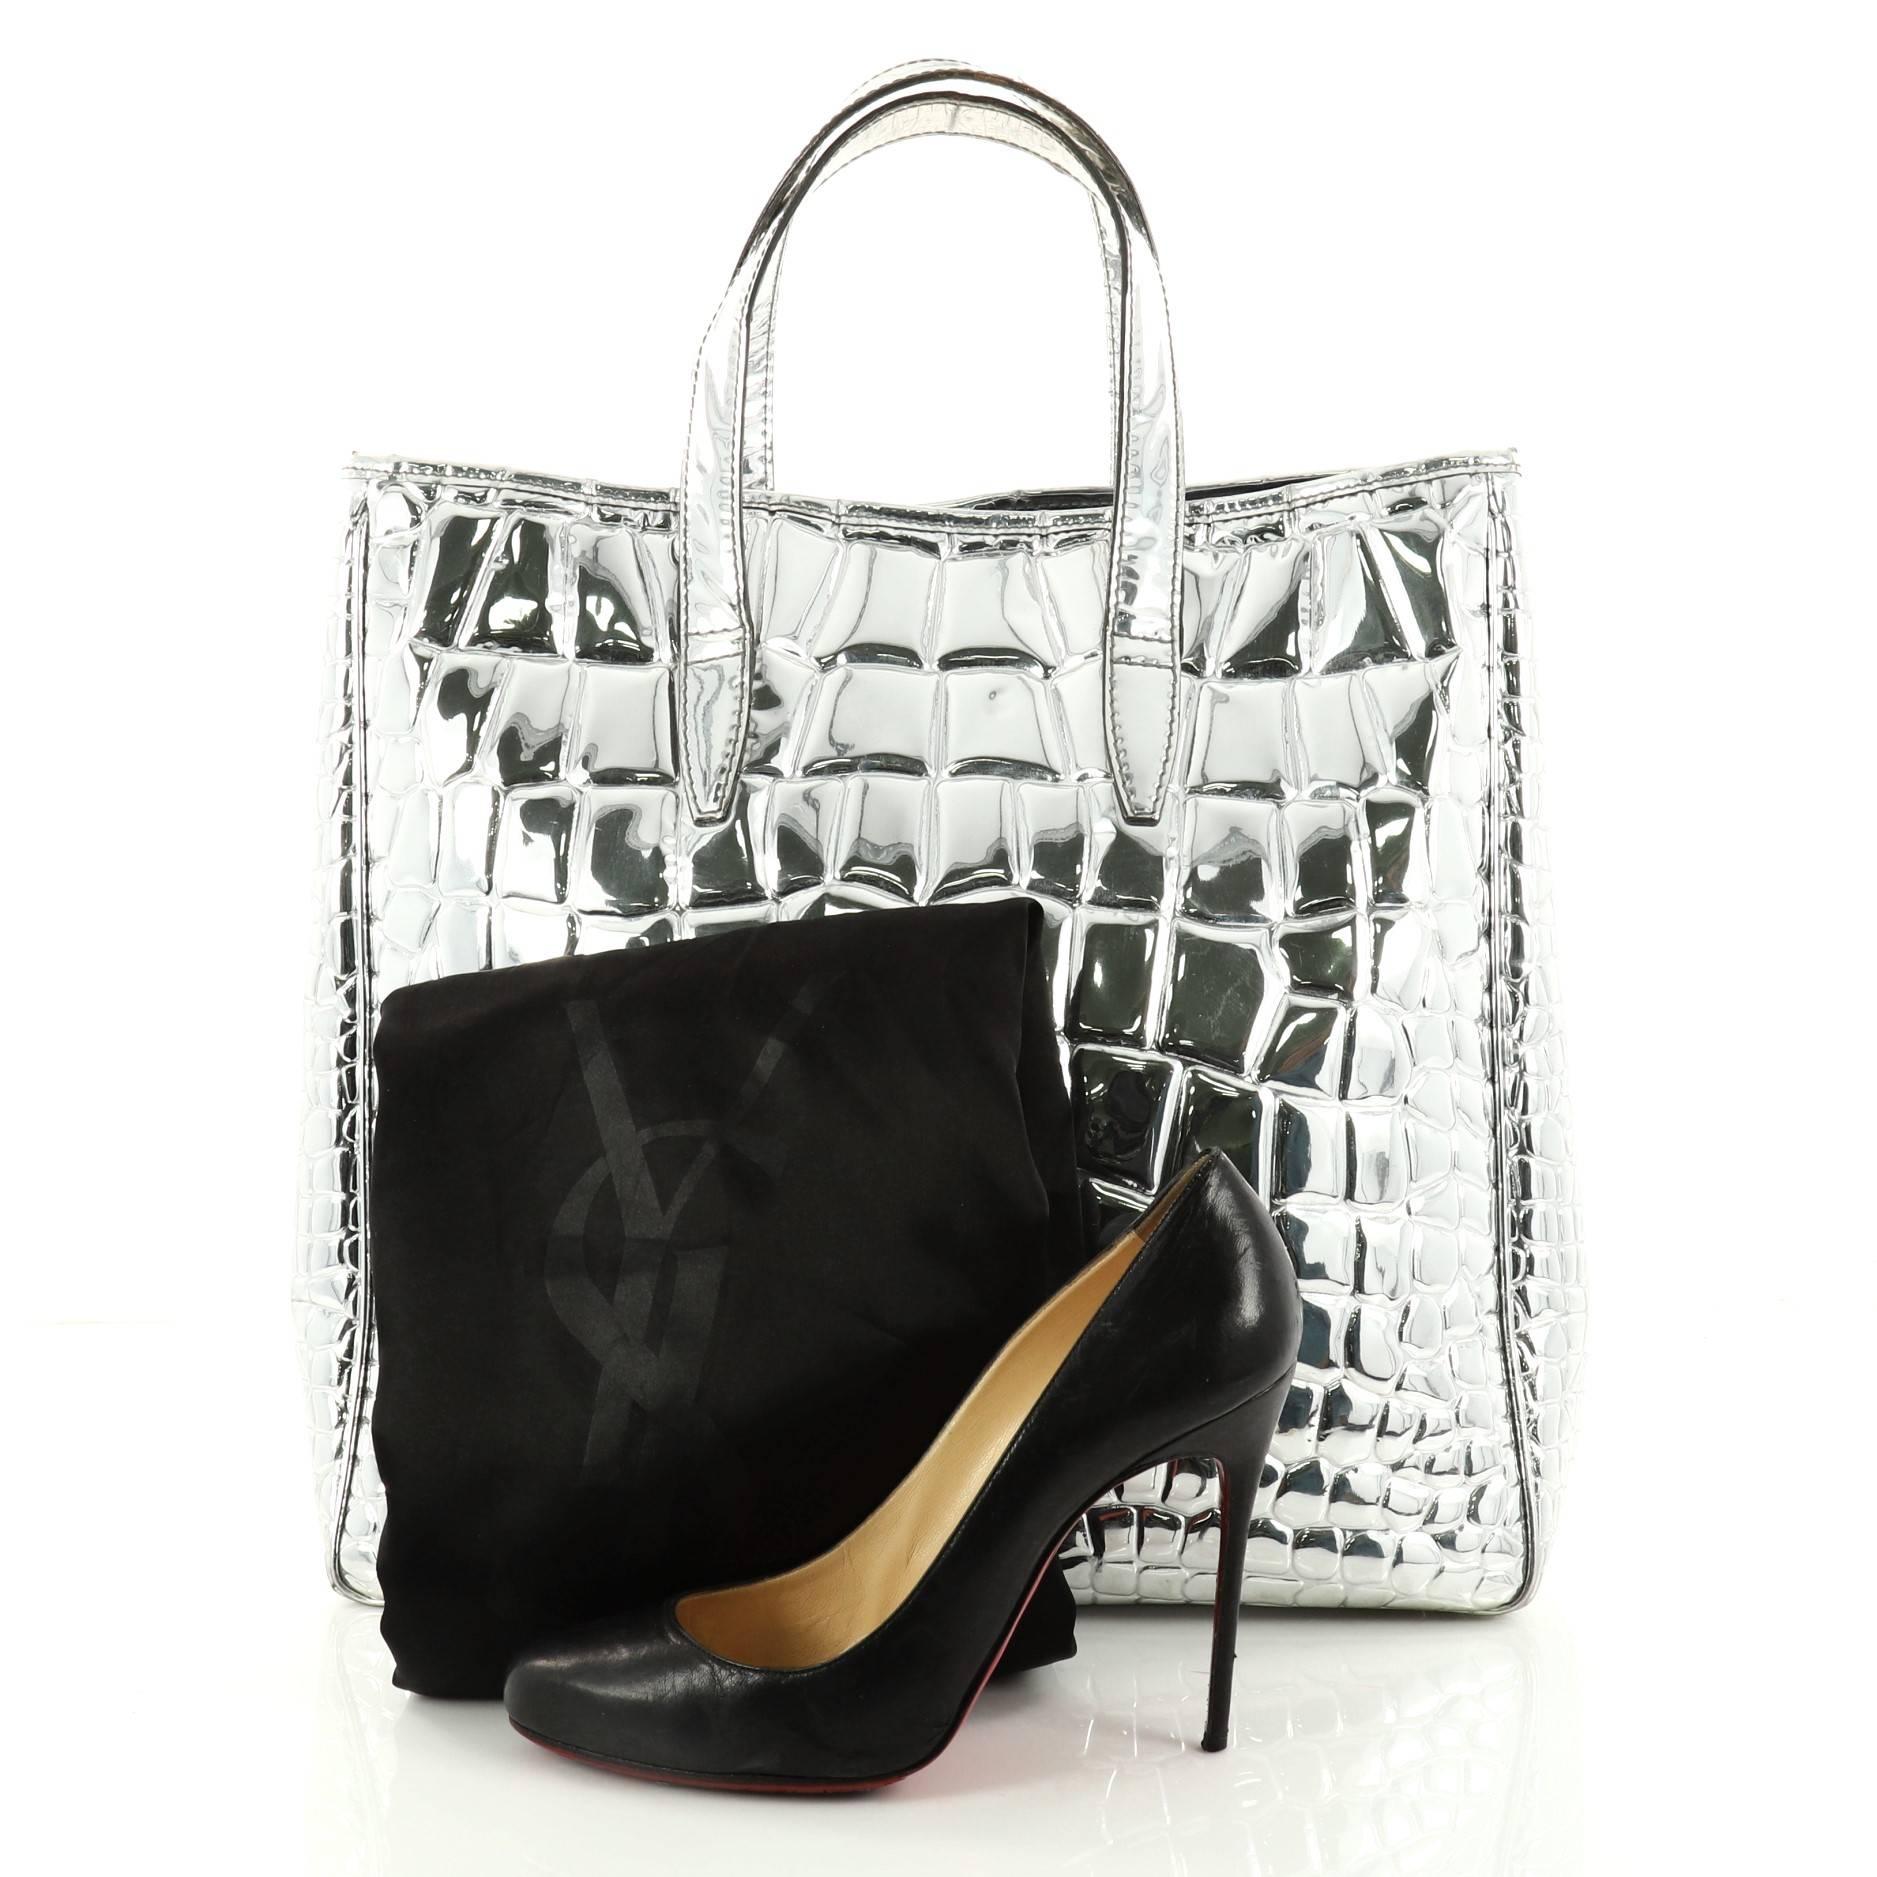 This authentic Saint Laurent Raspail Tote Crocodile Embossed Mirror Leather Medium is a stylish and gorgeous bag that will add an edge to any outfit. Crafted in silver crocodile embossed mirror leather, this tote features dual flat leather handles,